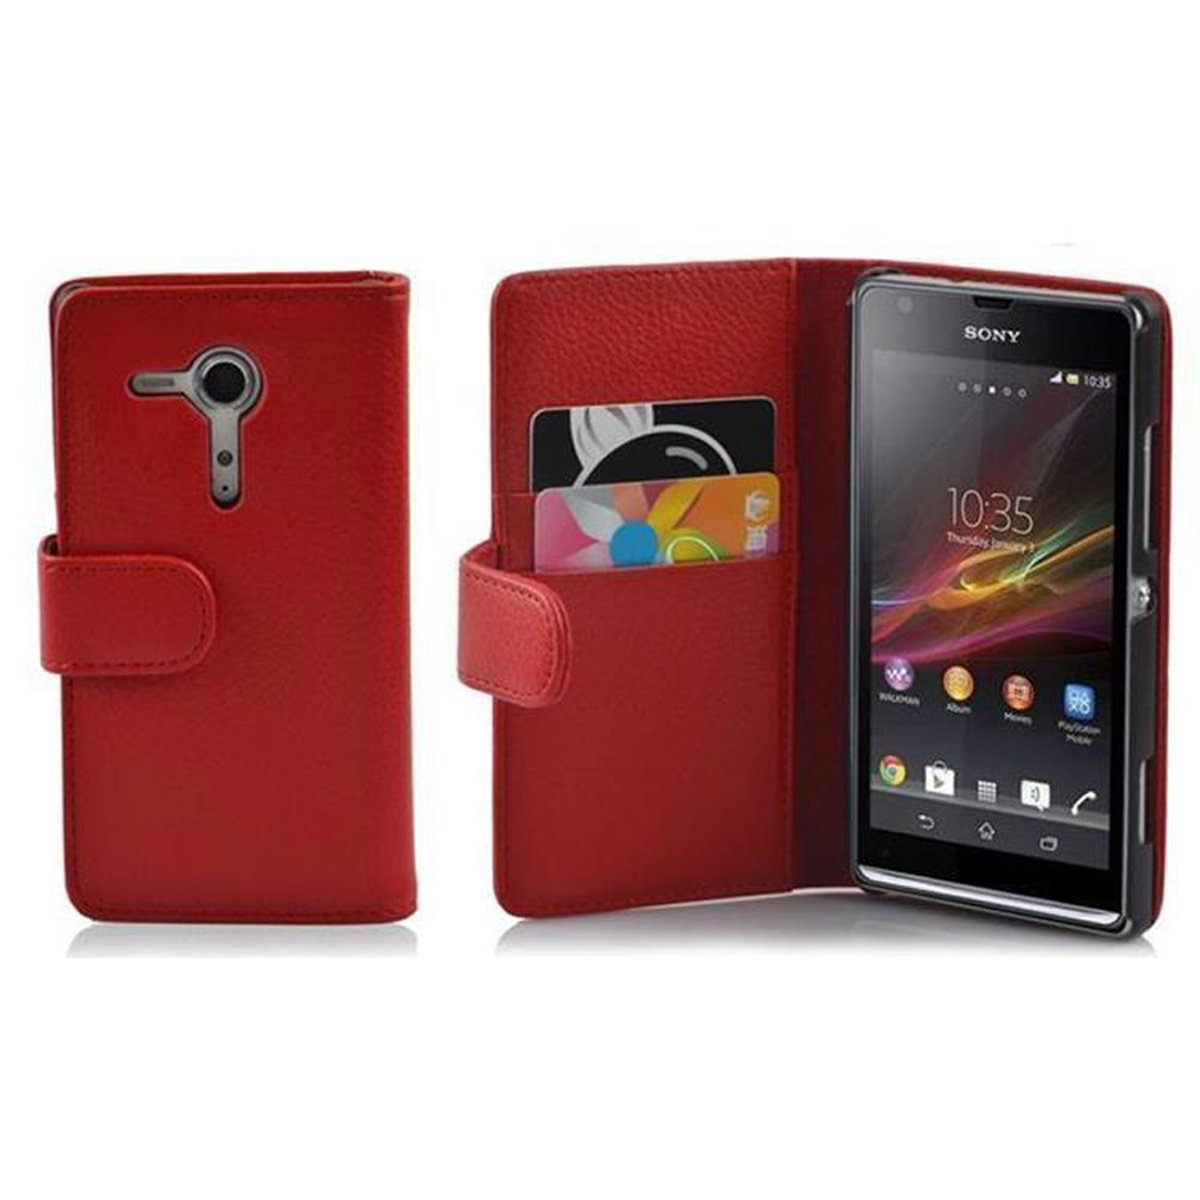 Struktur, Bookcover, Hülle Book Xperia INFERNO ROT CADORABO mit Sony, SP,